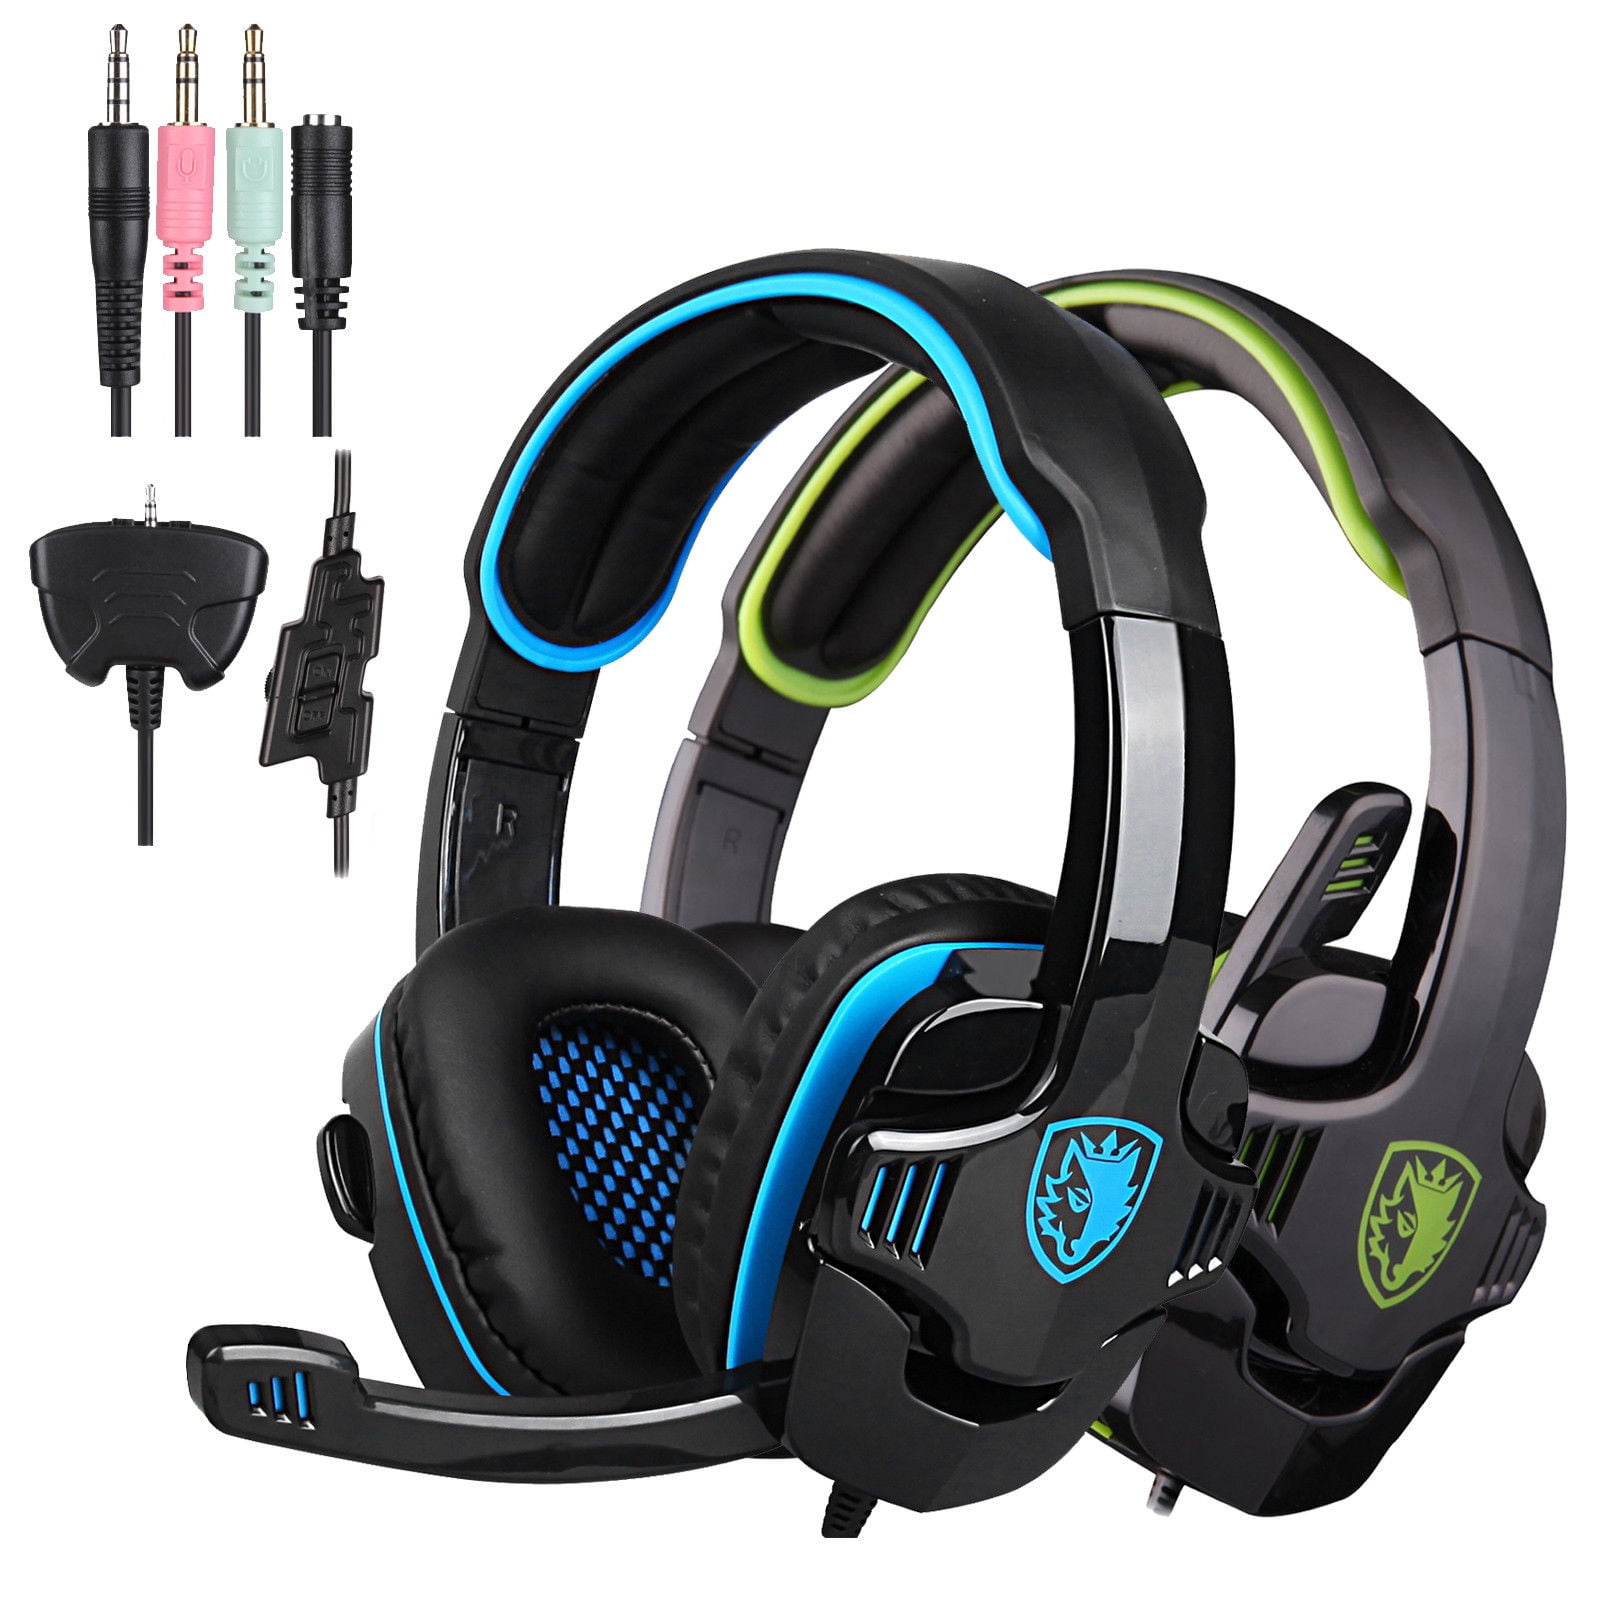 SADES SA-708 GT Stereo HiFi Gaming Headset Headphone with Microphone for  PS4 Xbox360 PC Mac iPhone SmartPhone Laptop(Green)